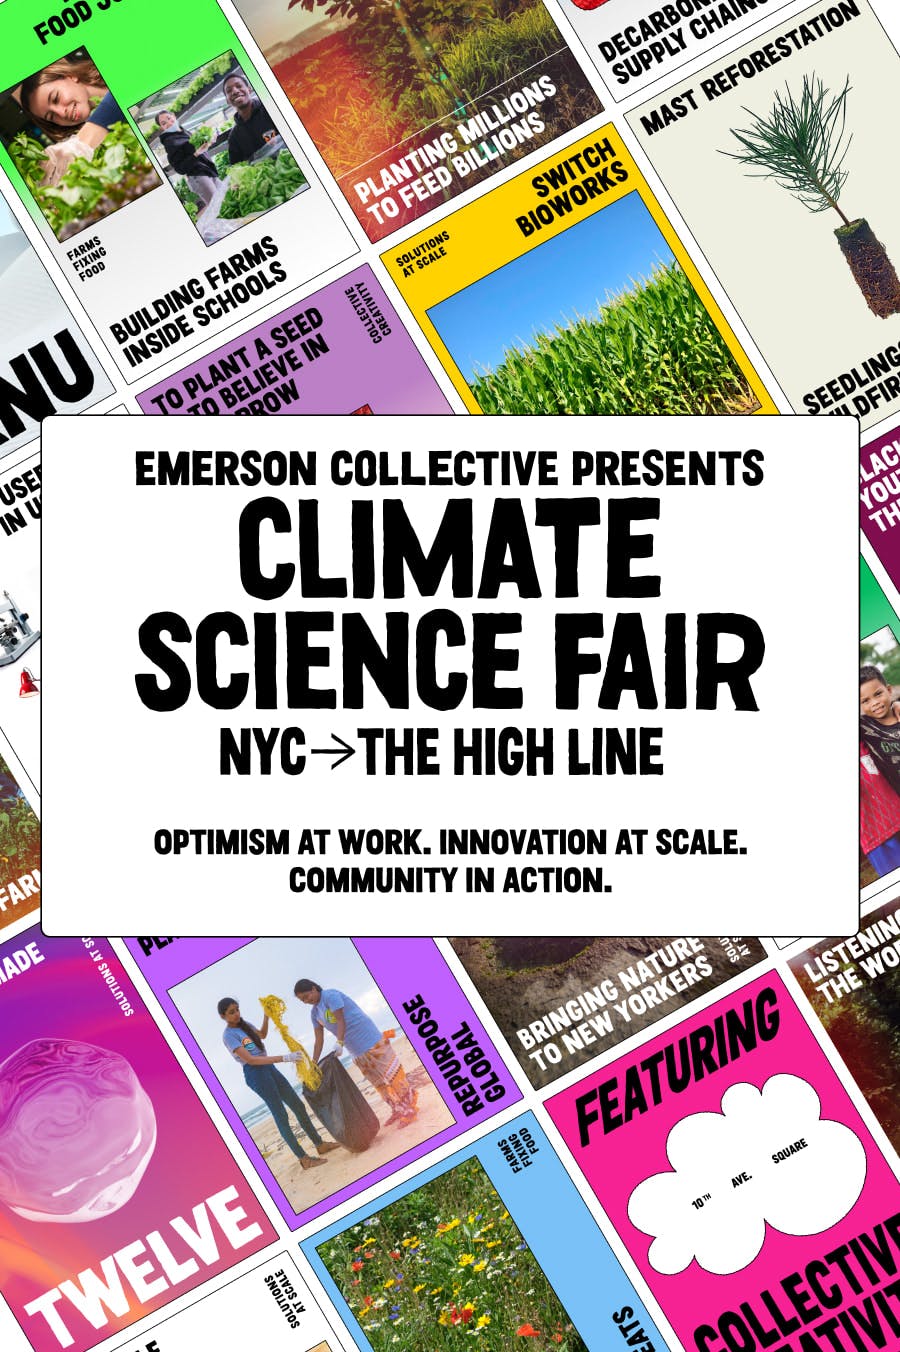 Emerson Collective Presents Climate Science Fair NYC > The High Line Sept 20-23 Optimisim at work. Innovation at Scale. Community in action.